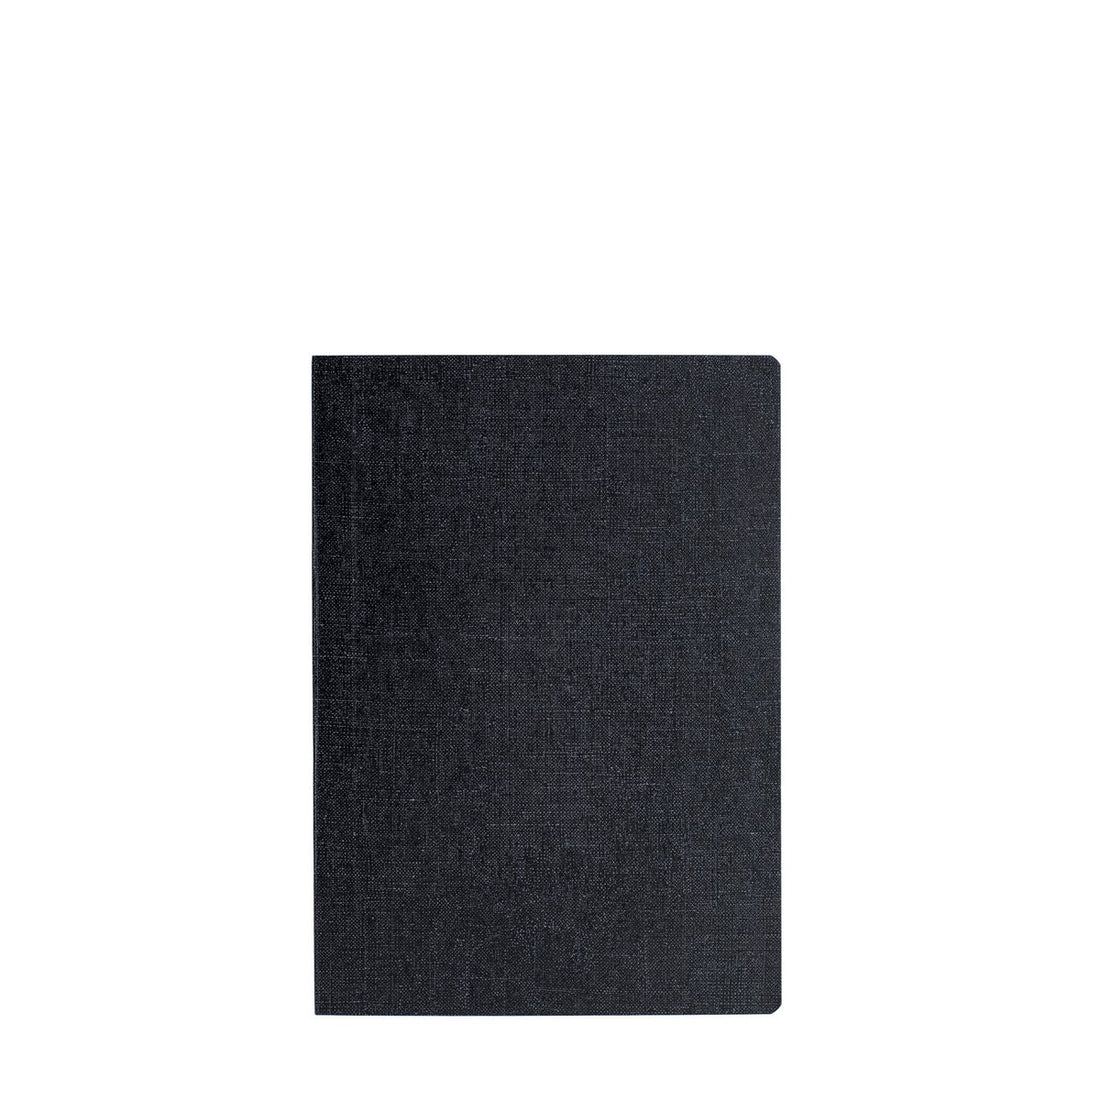 ITO BINDERY - BLACK NOTEBOOK GRID A6